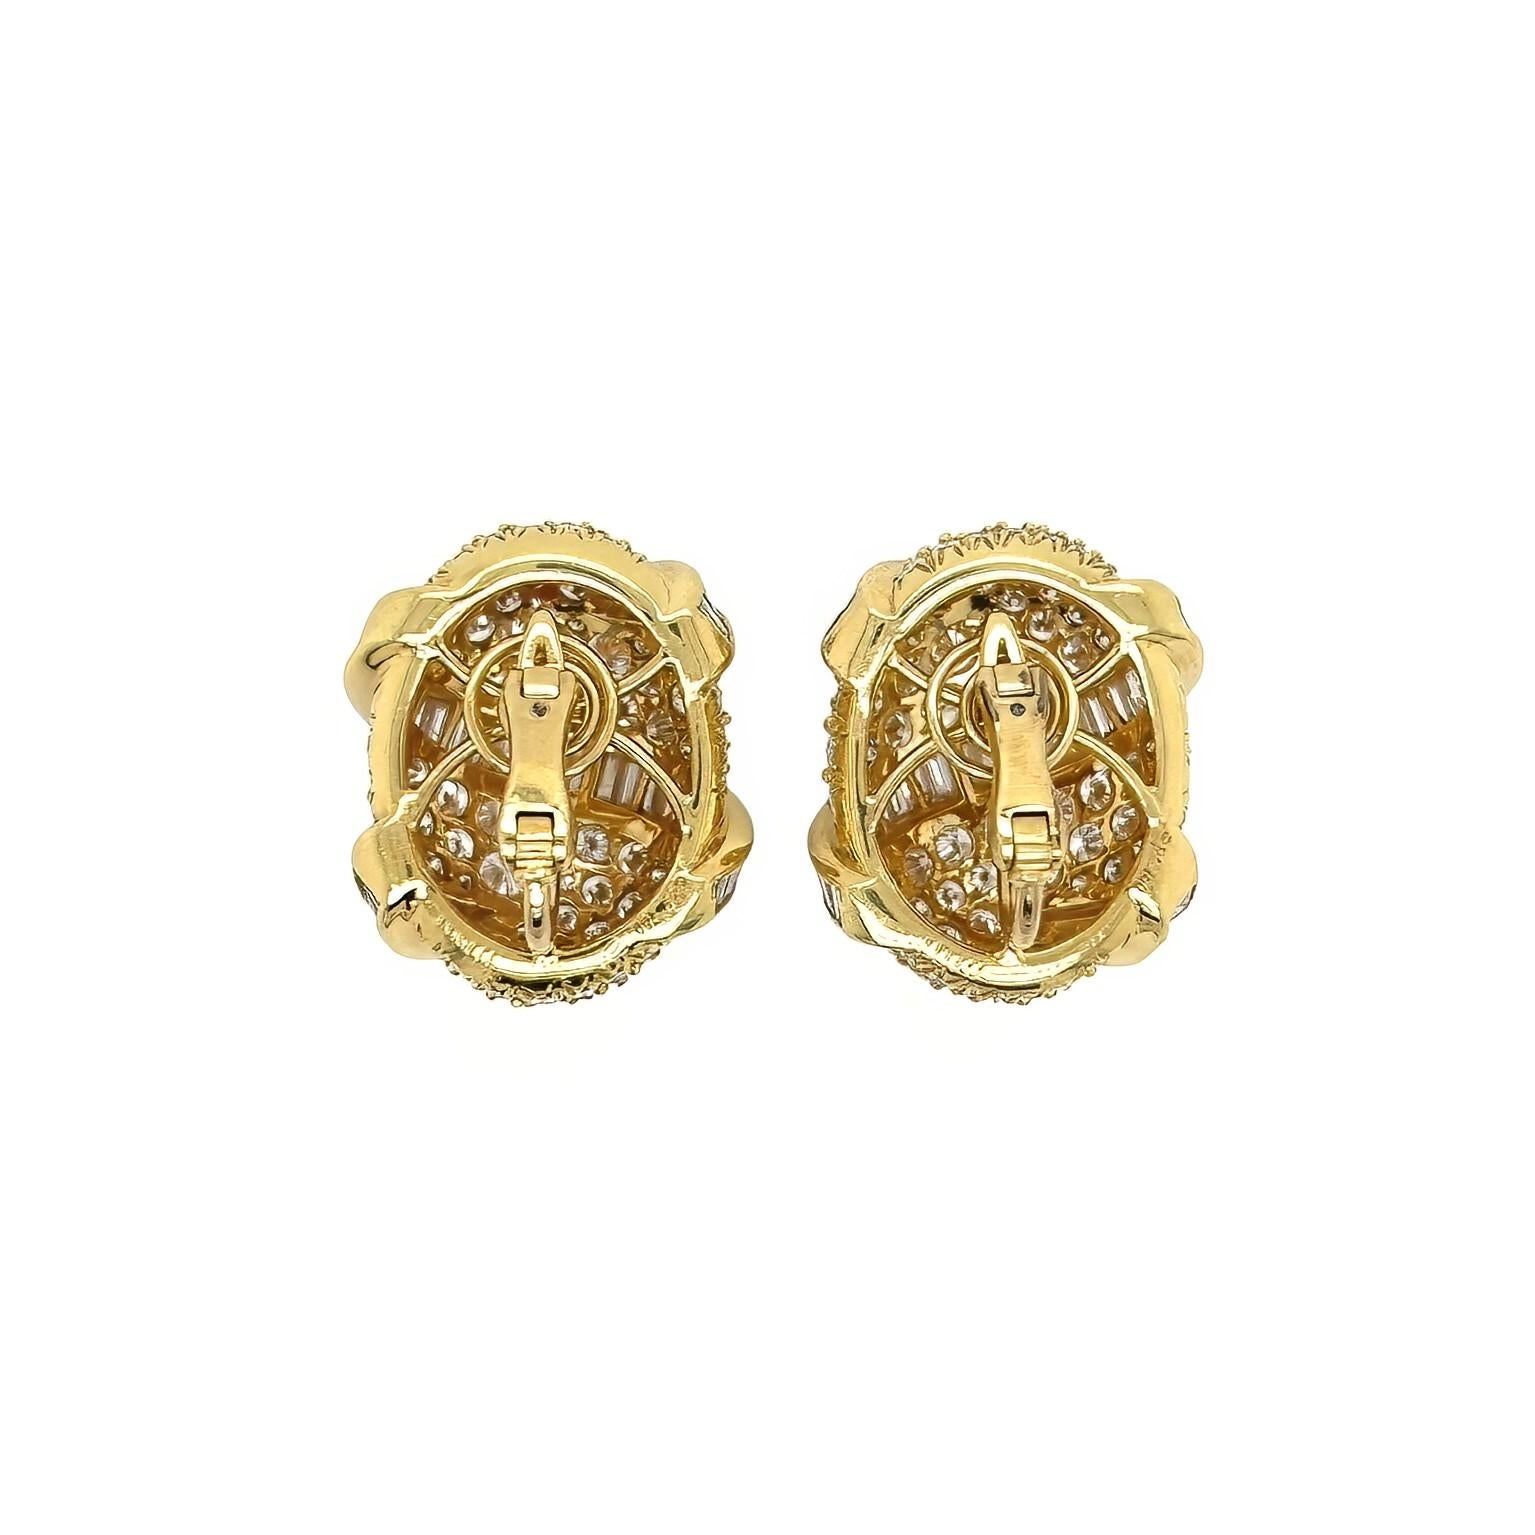 A pair of 18 karat yellow gold and diamond earclips, Kurt Wayne.  Each earclip designed as a puffed oval pave set with approximately 88 round brilliant cut diamonds overlaid with a trompe l'oeil spiral of approximately 37 channel set baguette cut